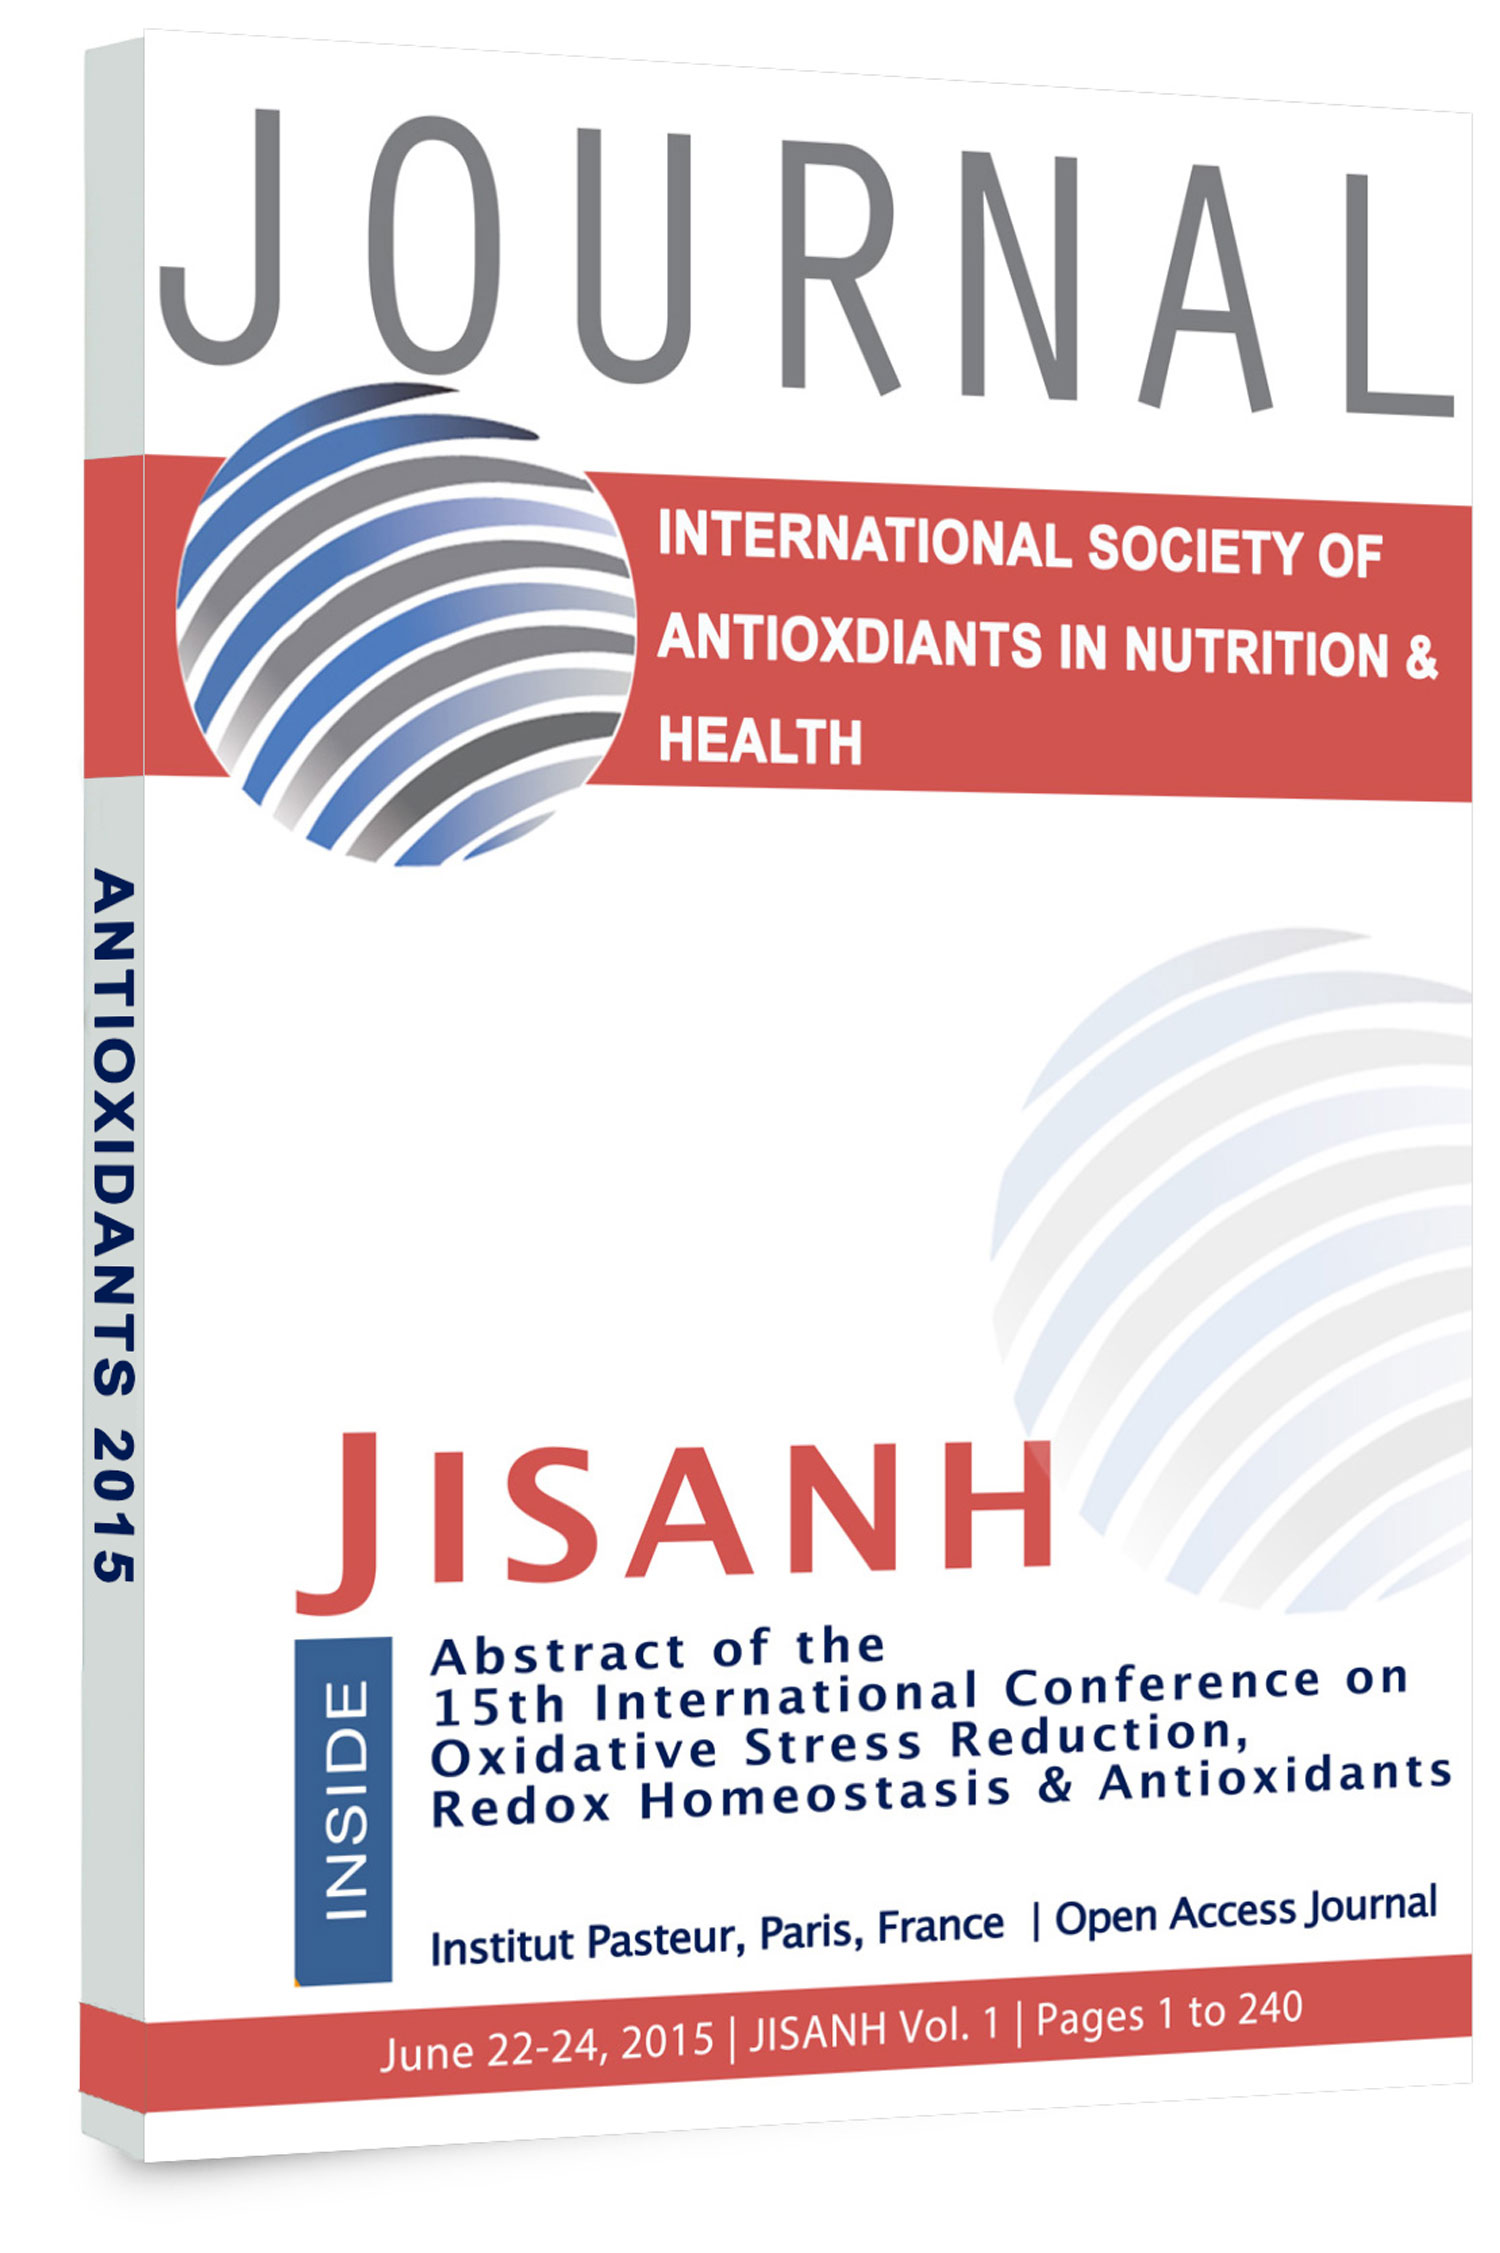 ISANH-journal-cover-3D